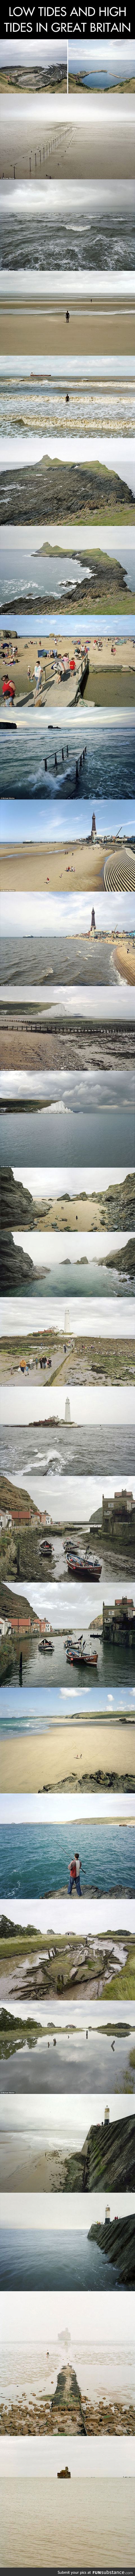 Difference in High and Low tides in England